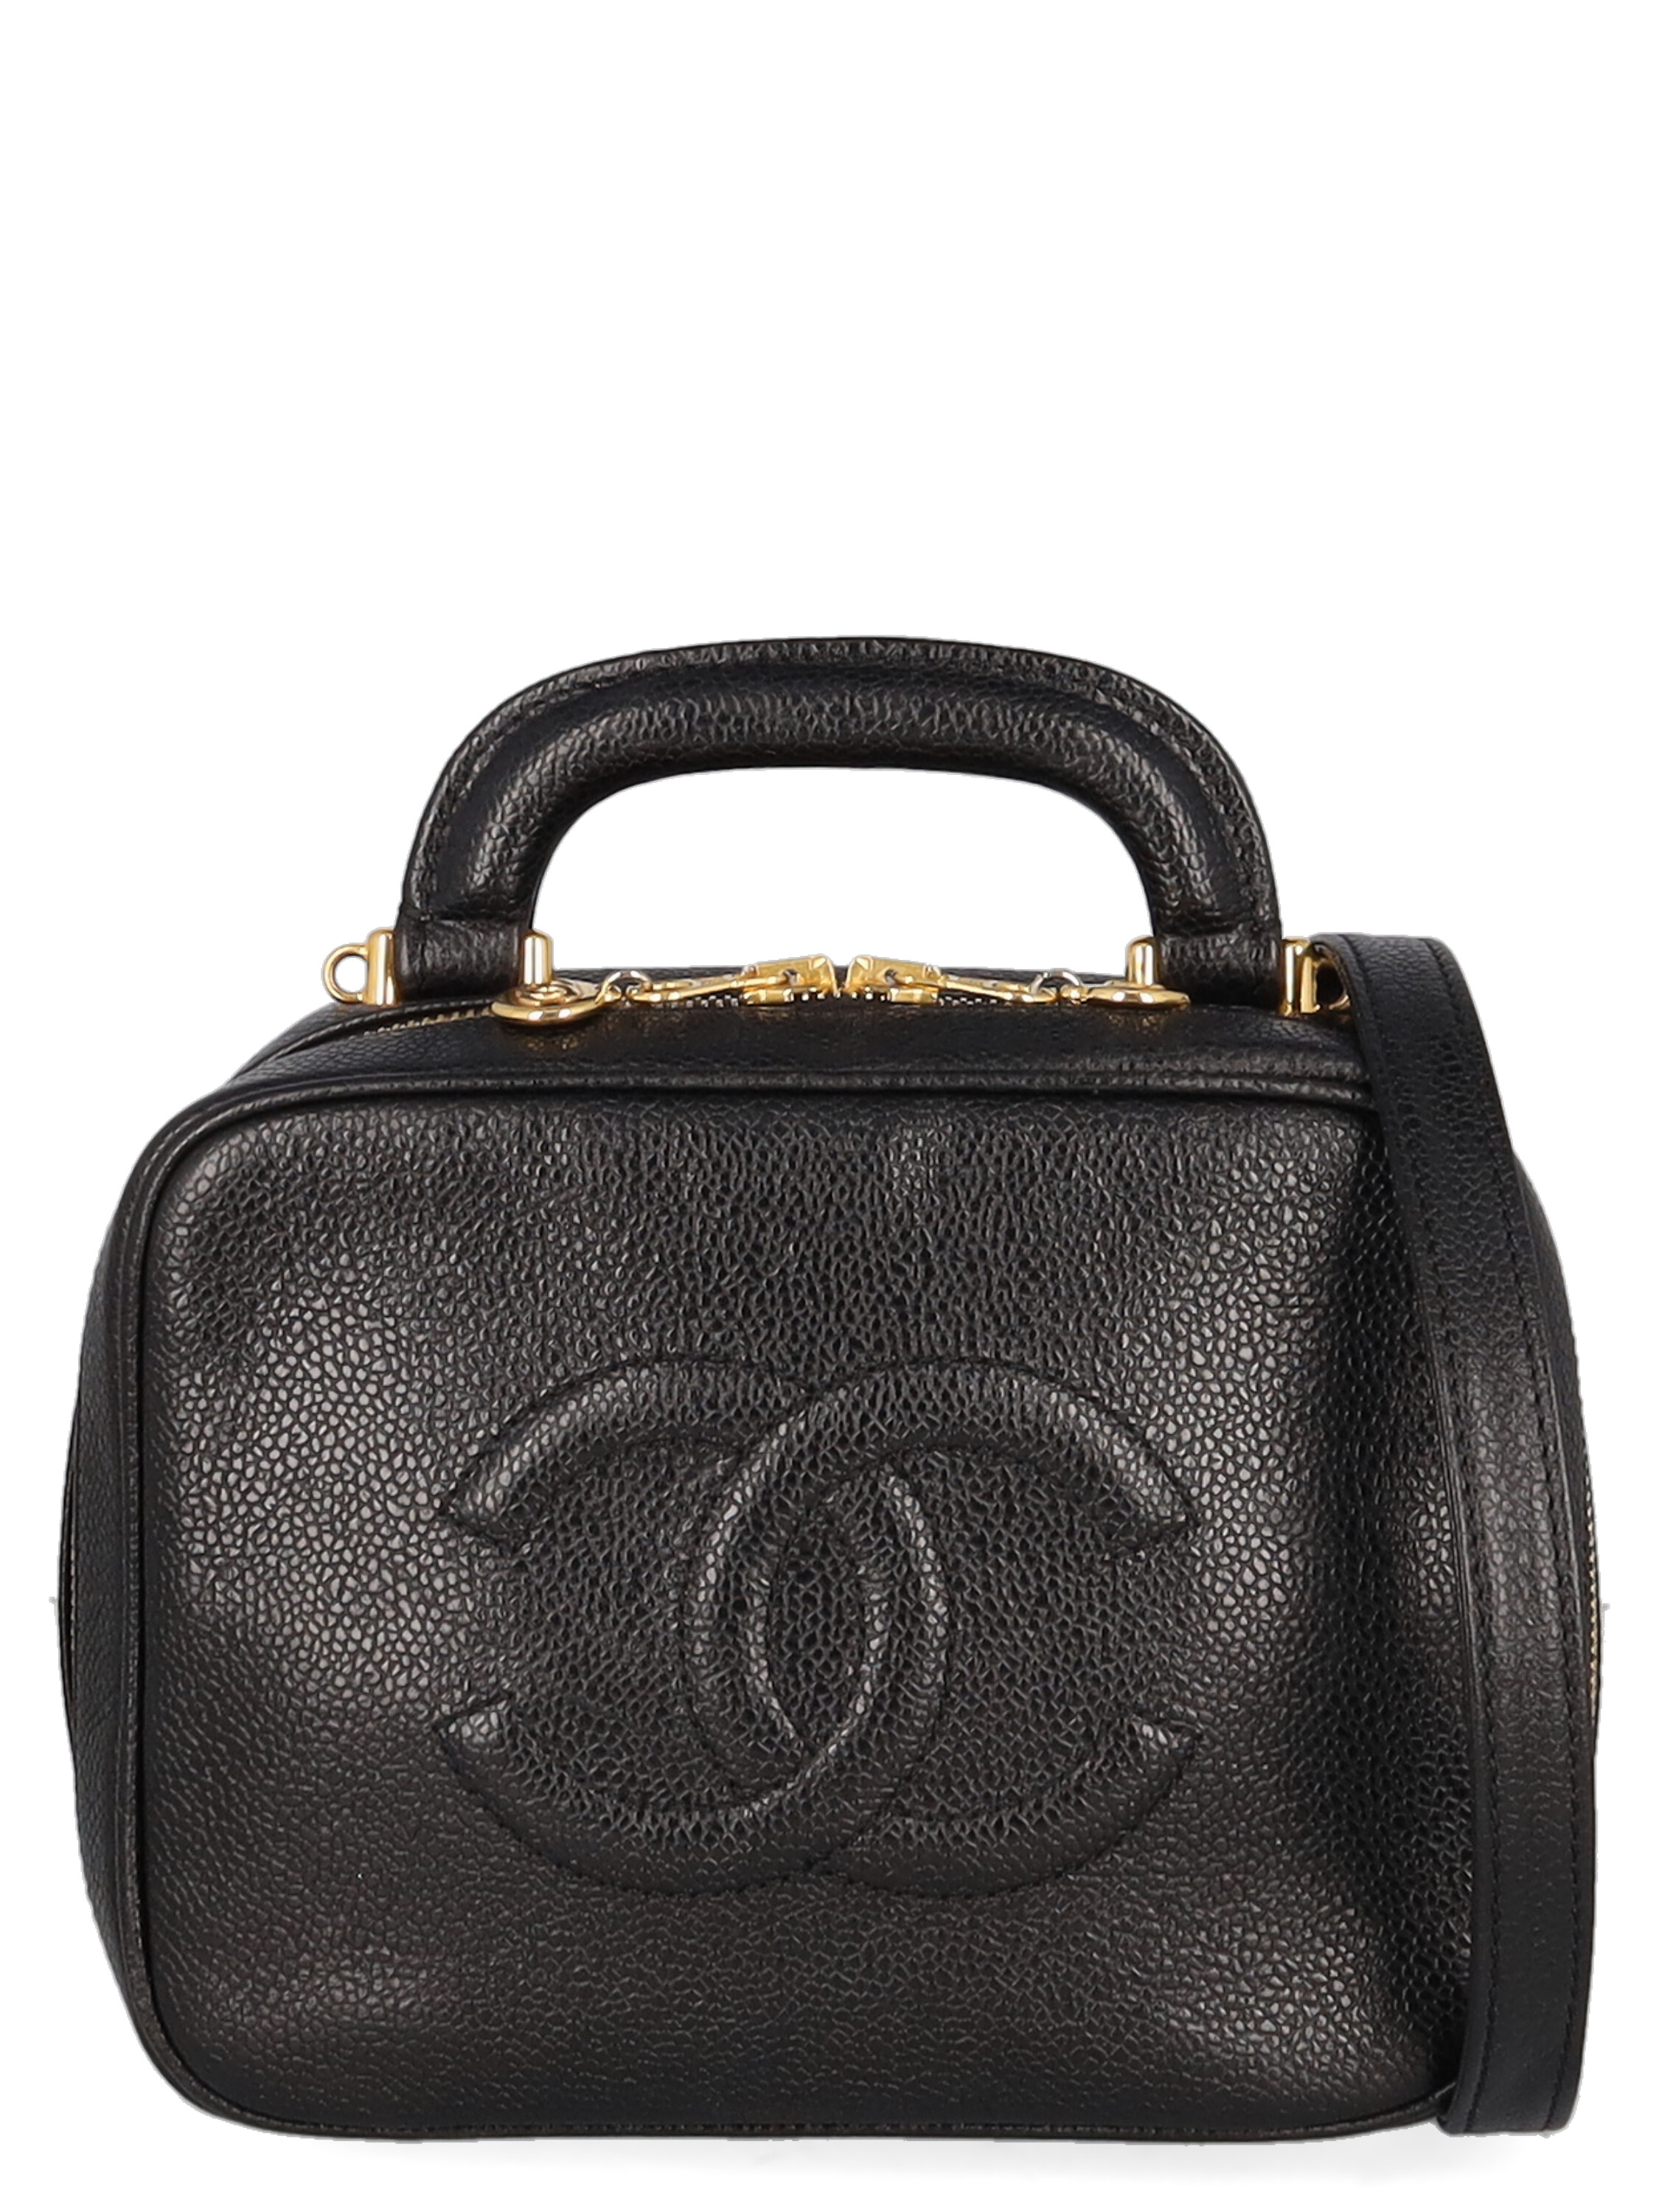 Pre-owned Chanel Women's Bag Accessories -